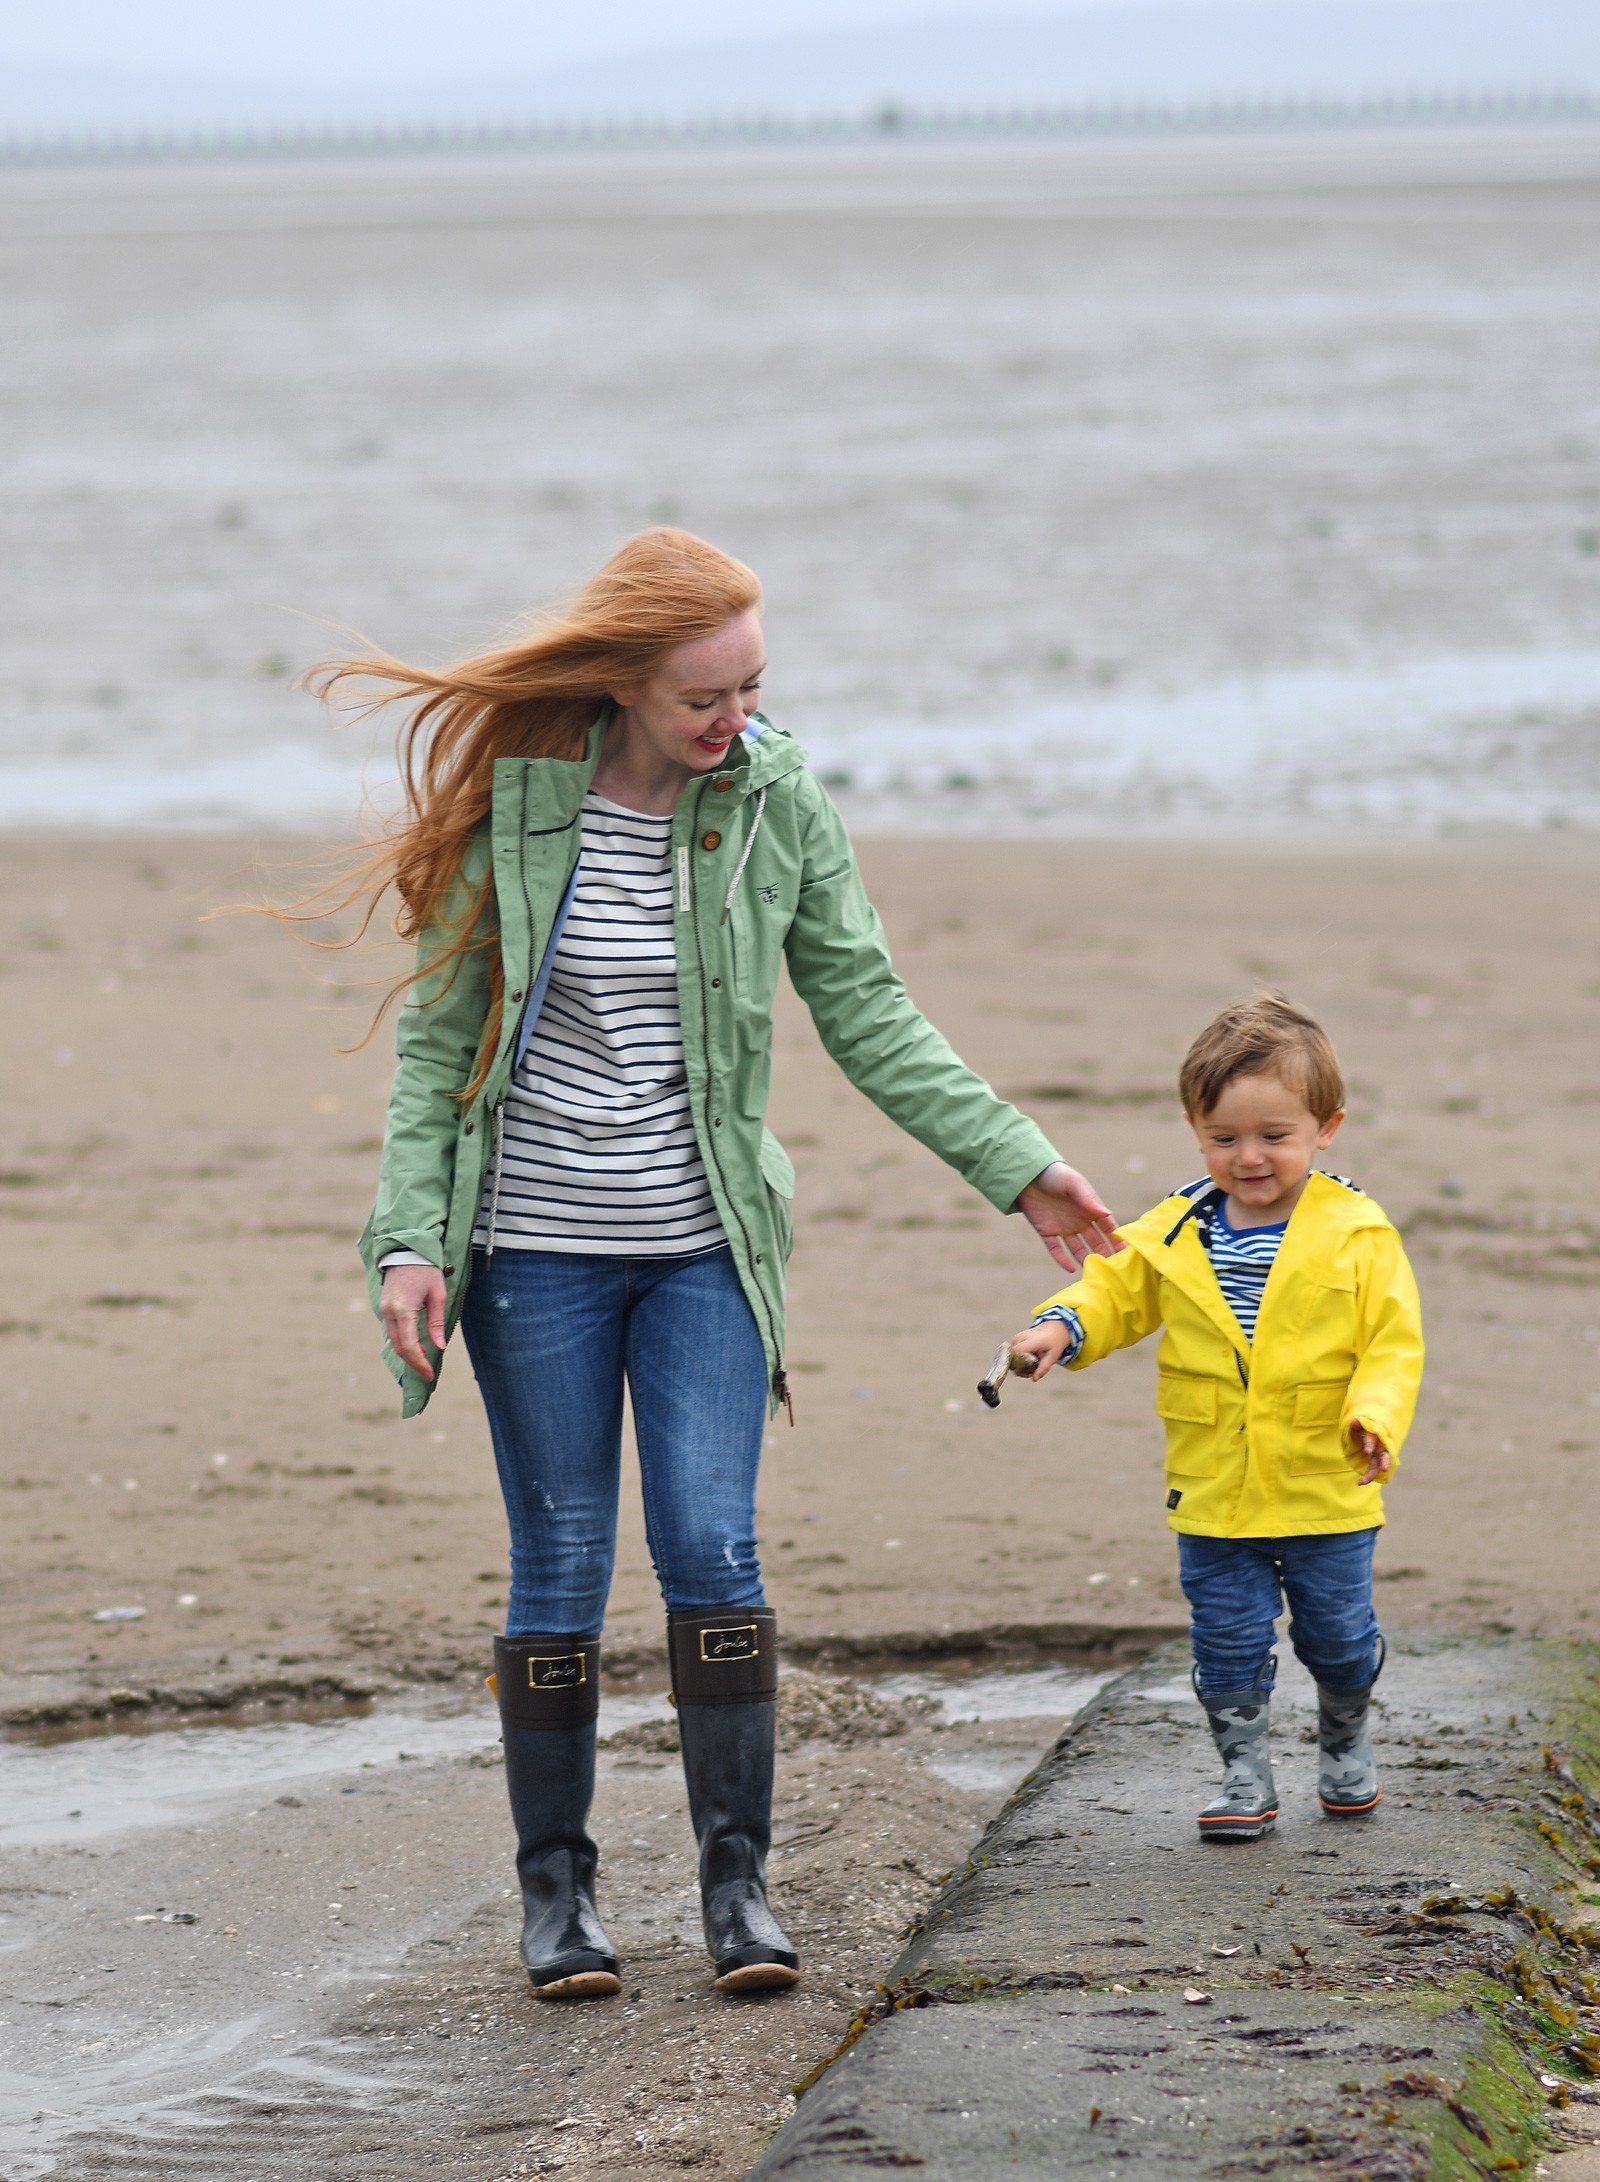 Mum and toddler on the beach in raincoats and wellies